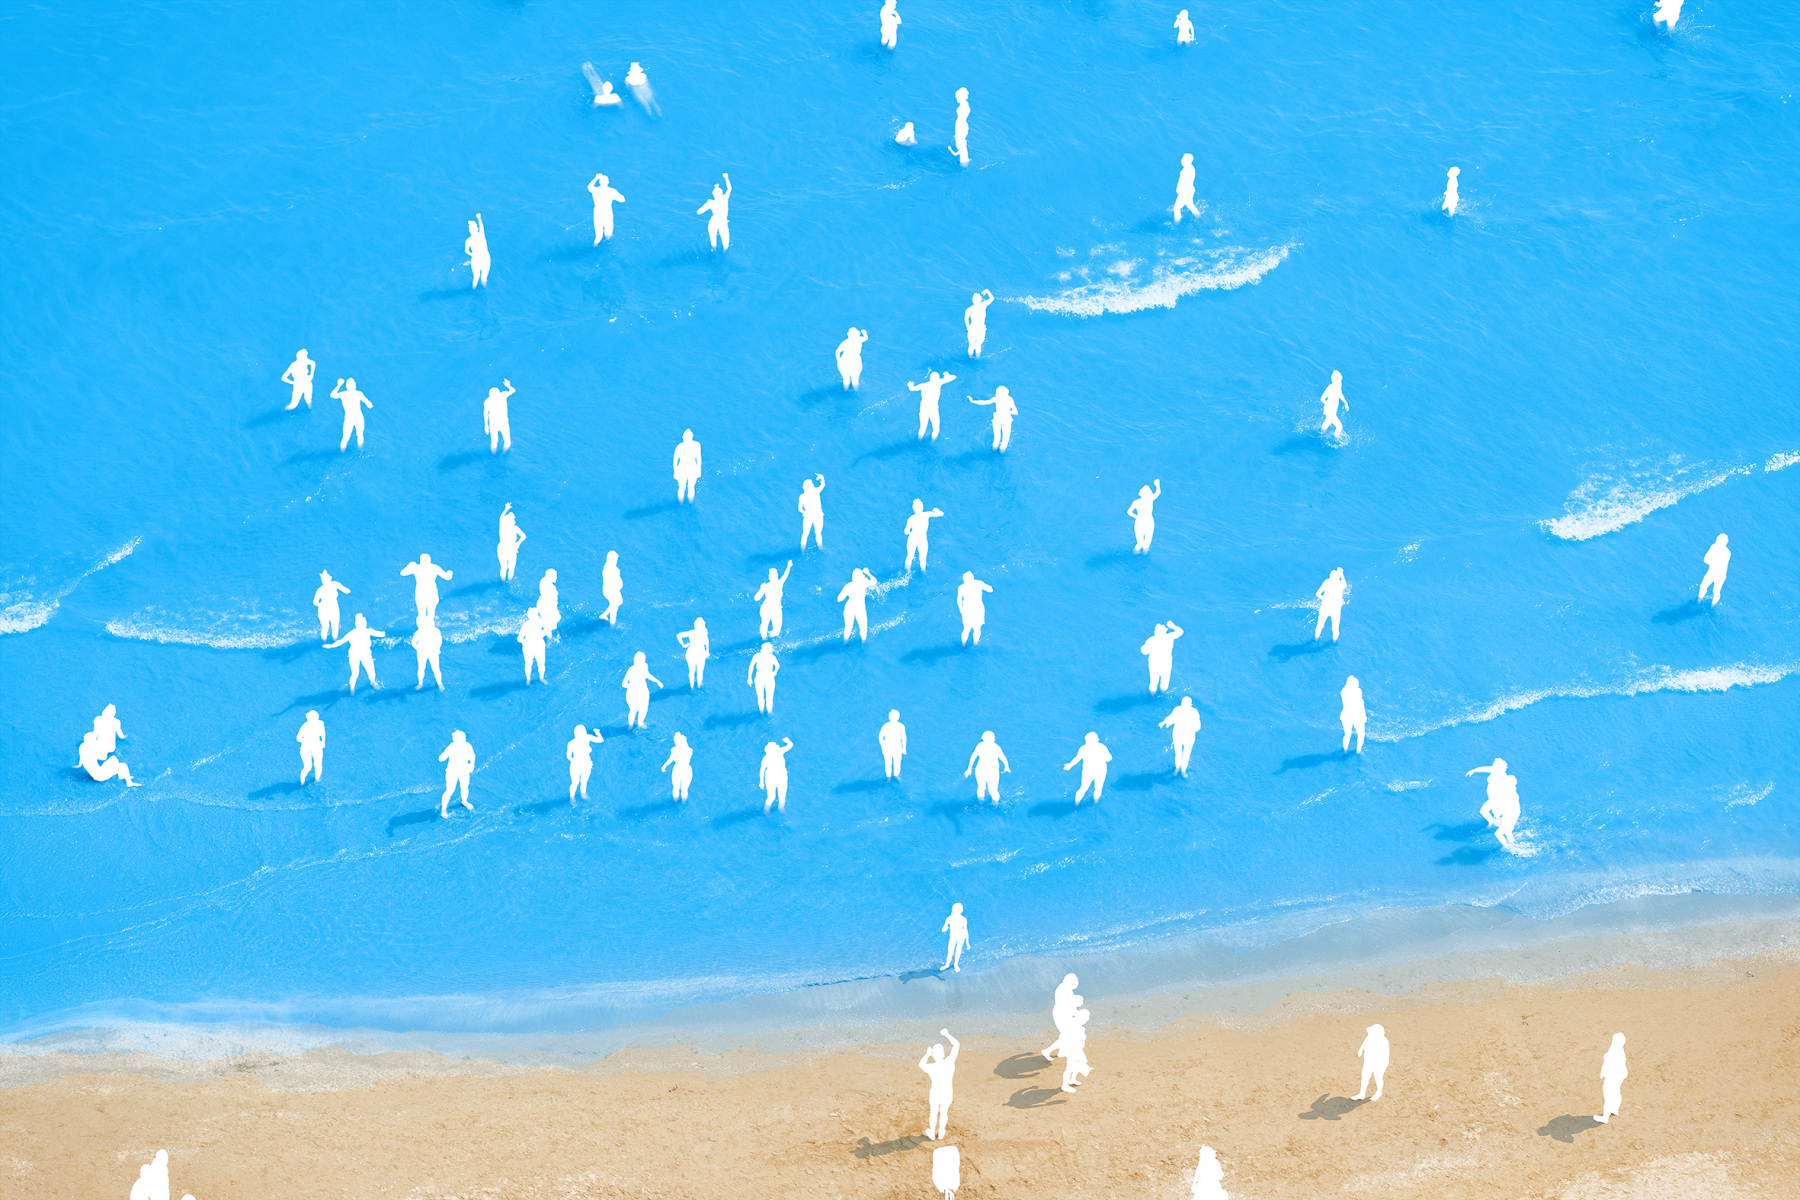 Adriatic Sea (Staged) Dancing People #10, 2015. Archival pigment print,&nbsp;65 x 96 inch or 45 x 65&nbsp;inches.